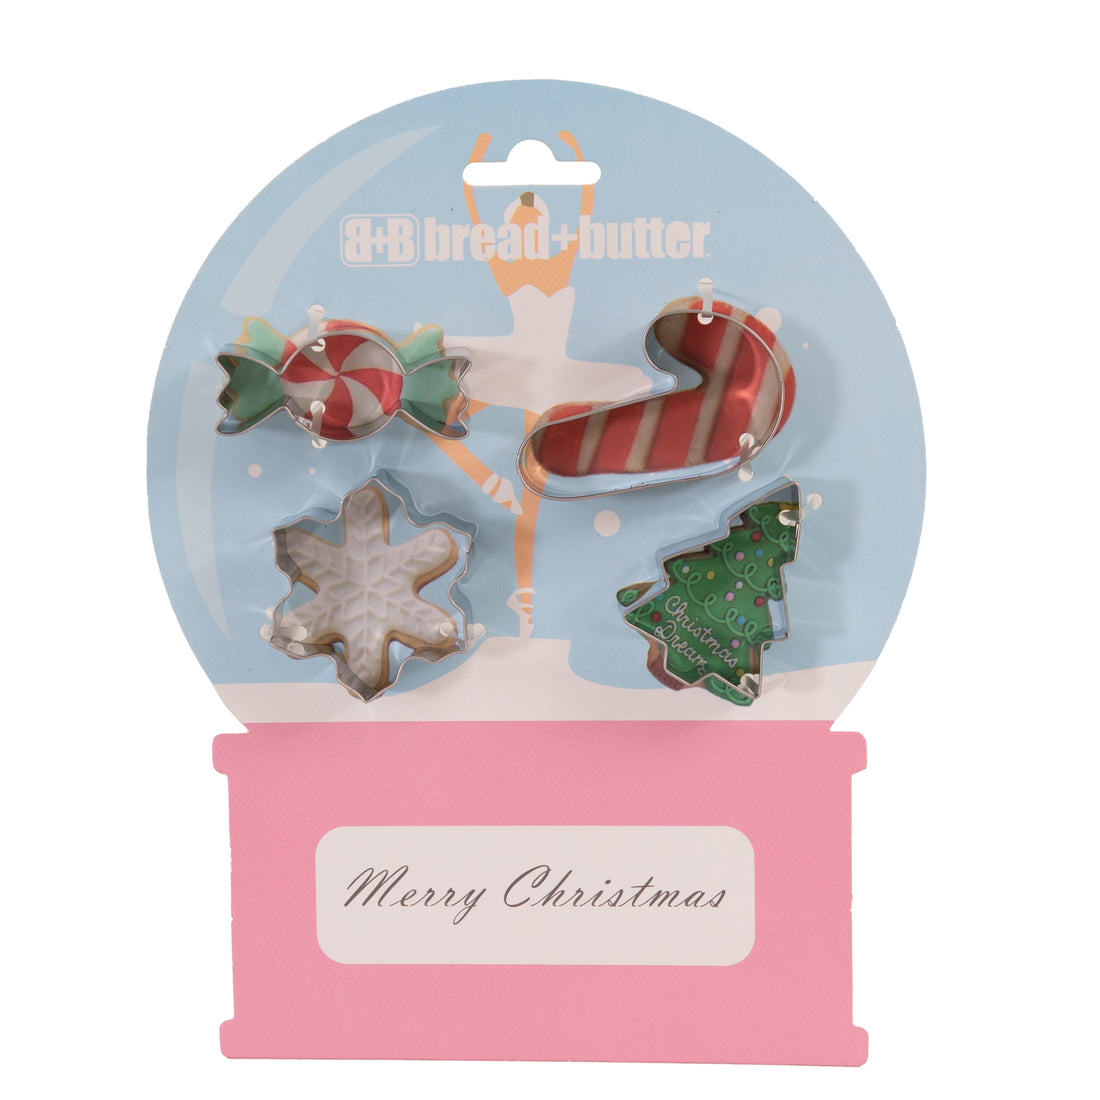 Bread and Butter Cookie Cutter - Snowglobe, Card, Tree, Candy Cane - 4 Pack-Decorations-PEROZ Accessories